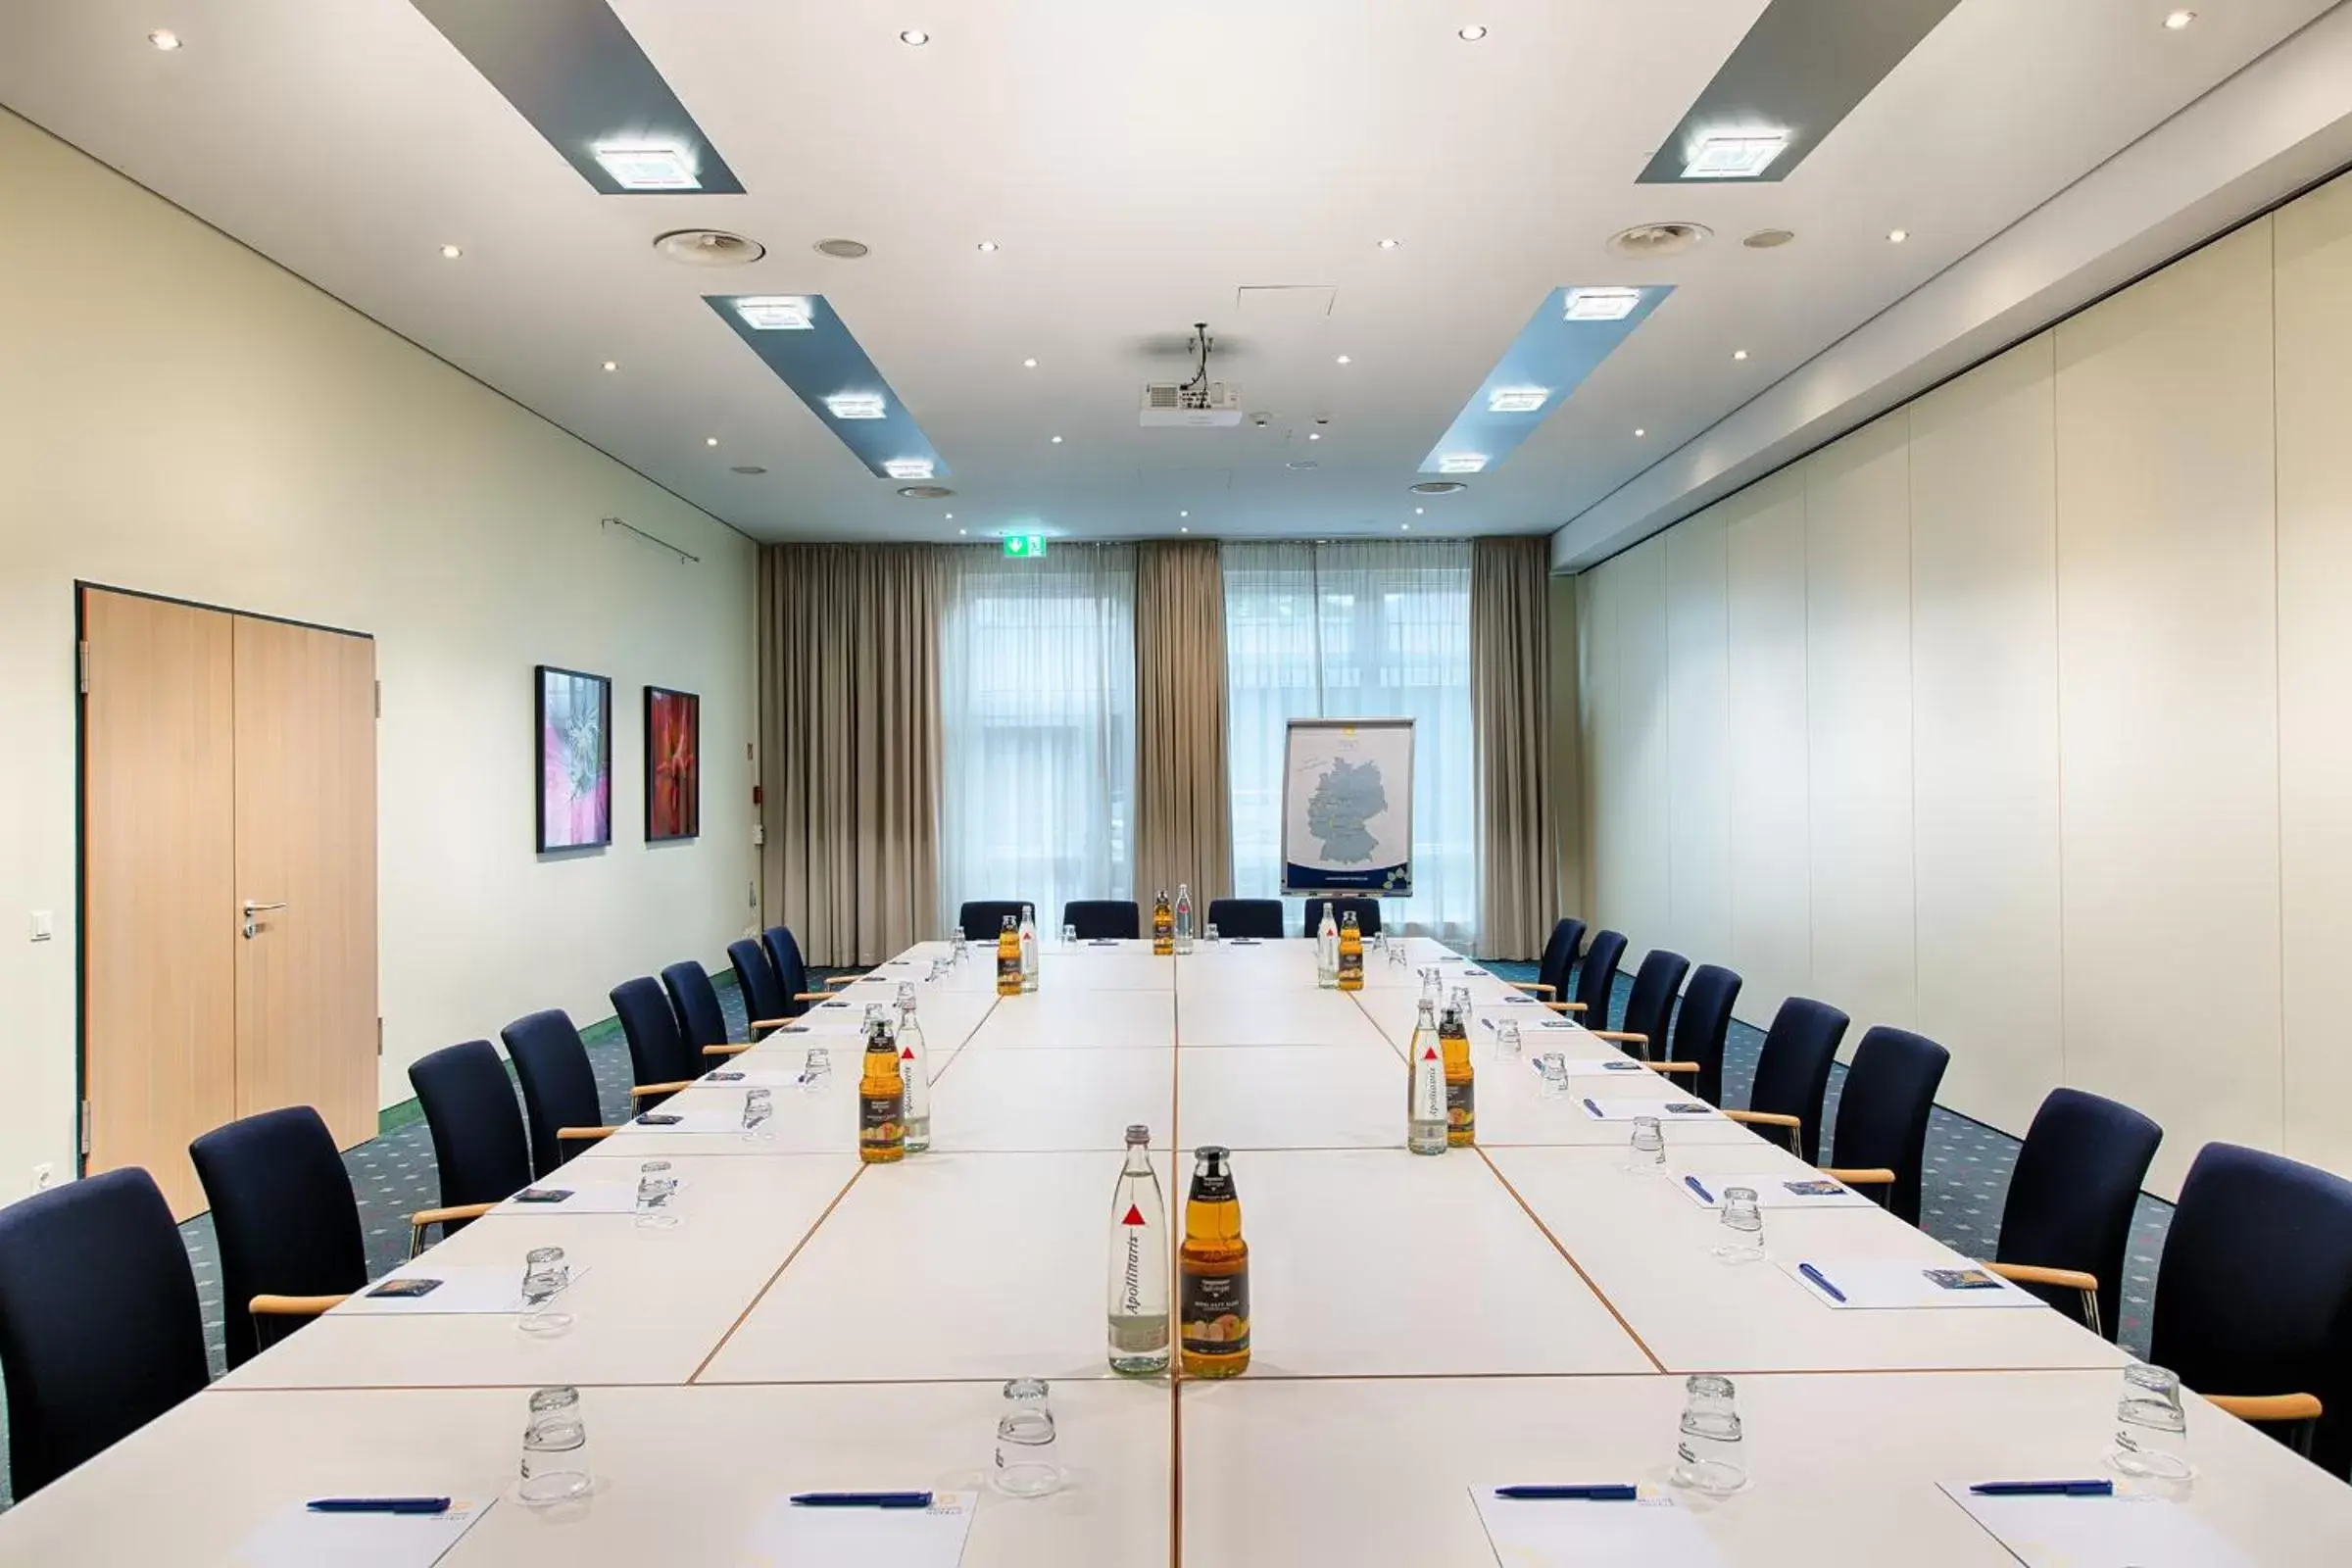 Business facilities in Welcome Hotel Paderborn